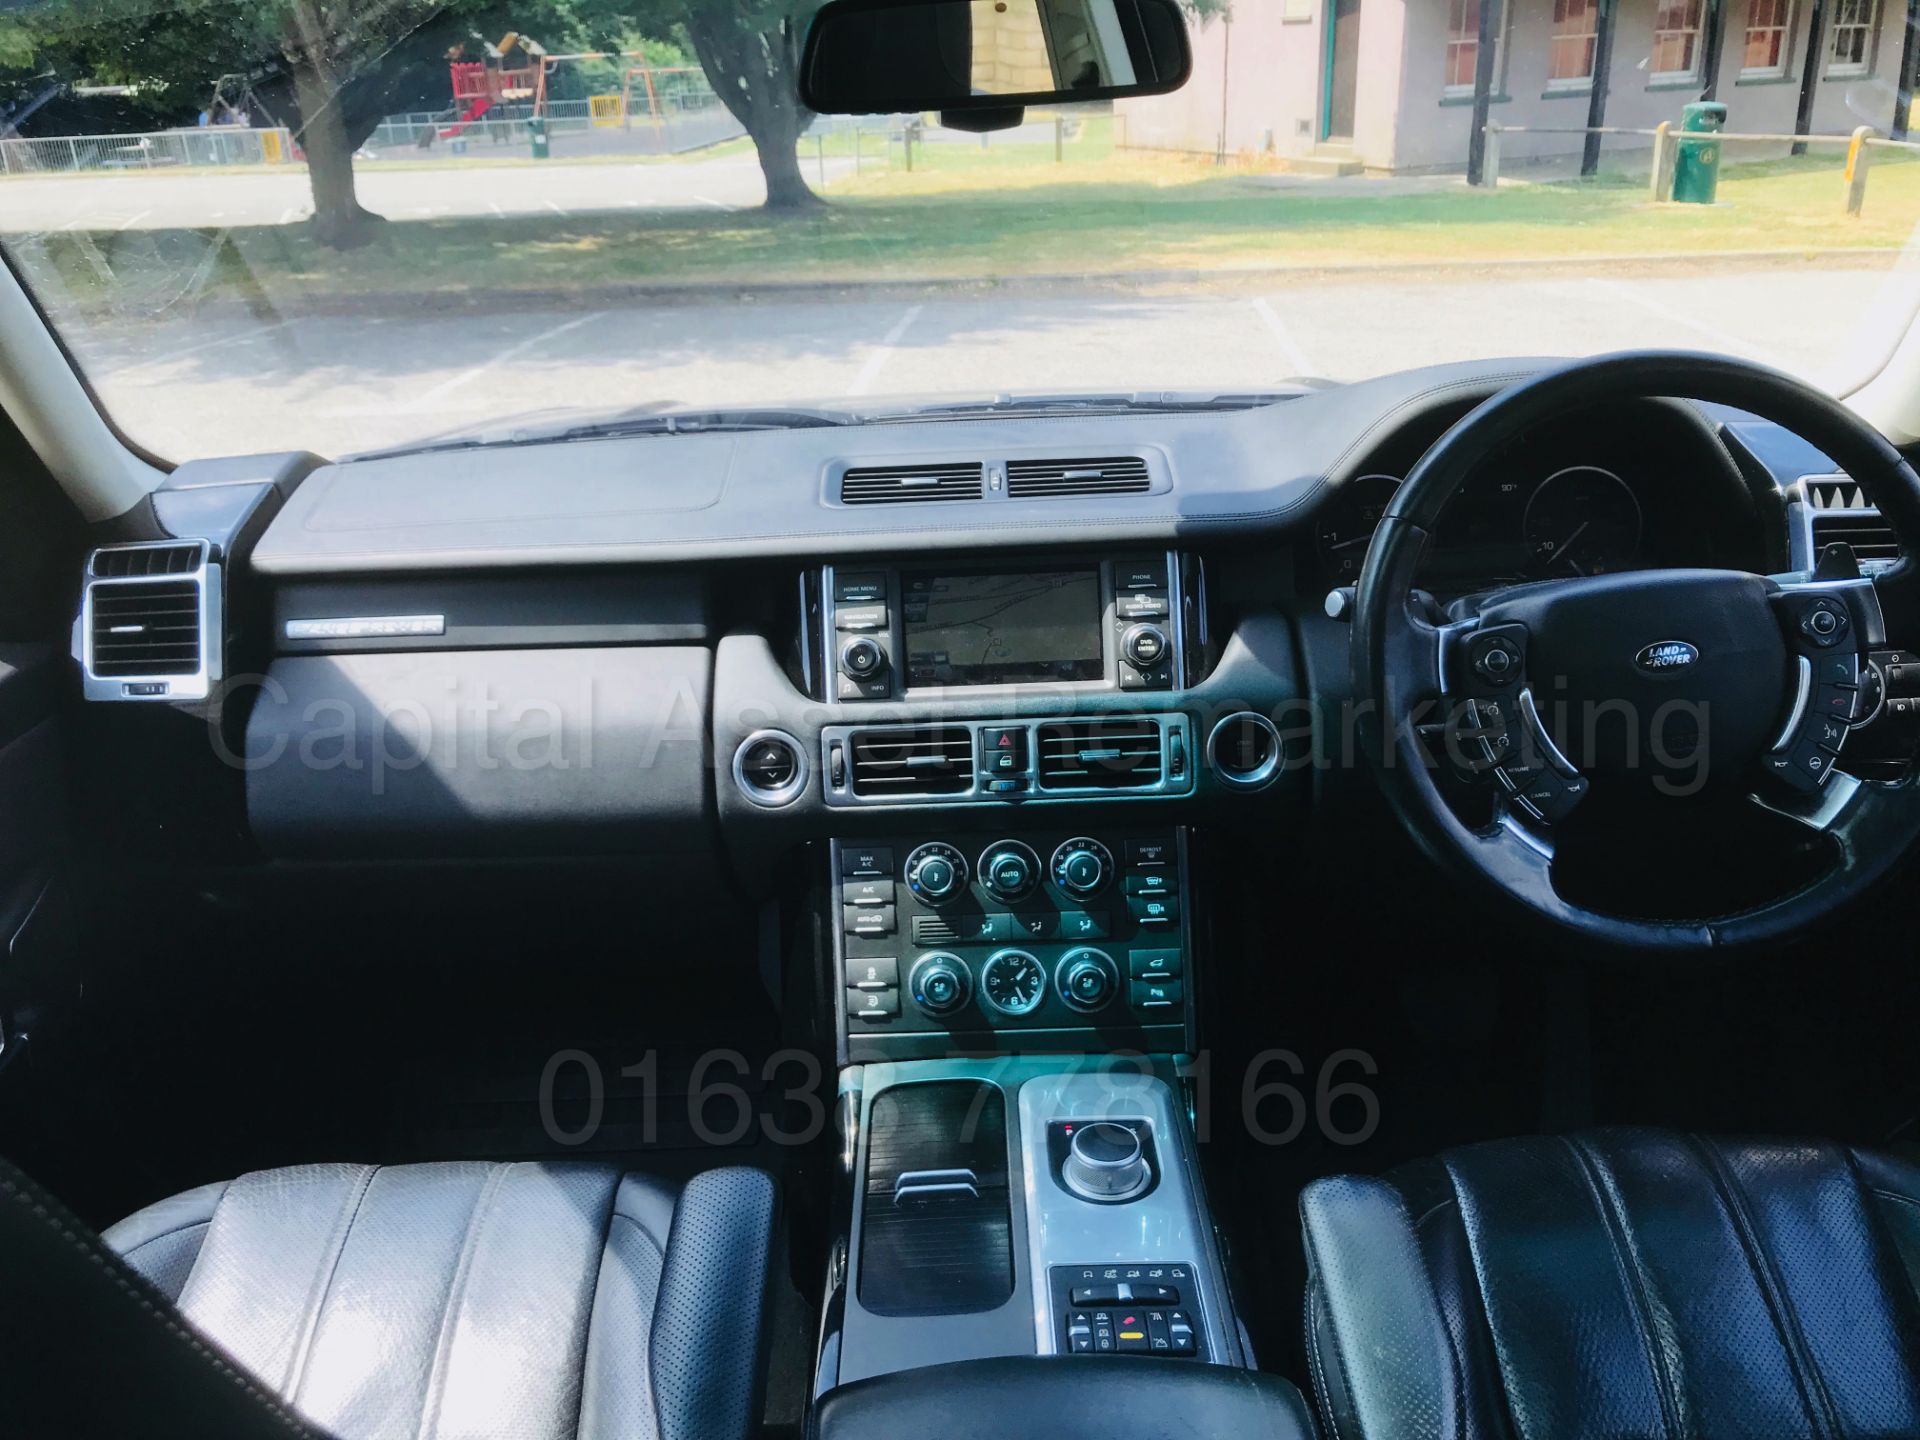 (On Sale) RANGE ROVER VOGUE SE (2011) 'TDV8 -8 SPEED AUTO' **FULLY LOADED** (1 OWNER - FULL HISTORY) - Image 37 of 60